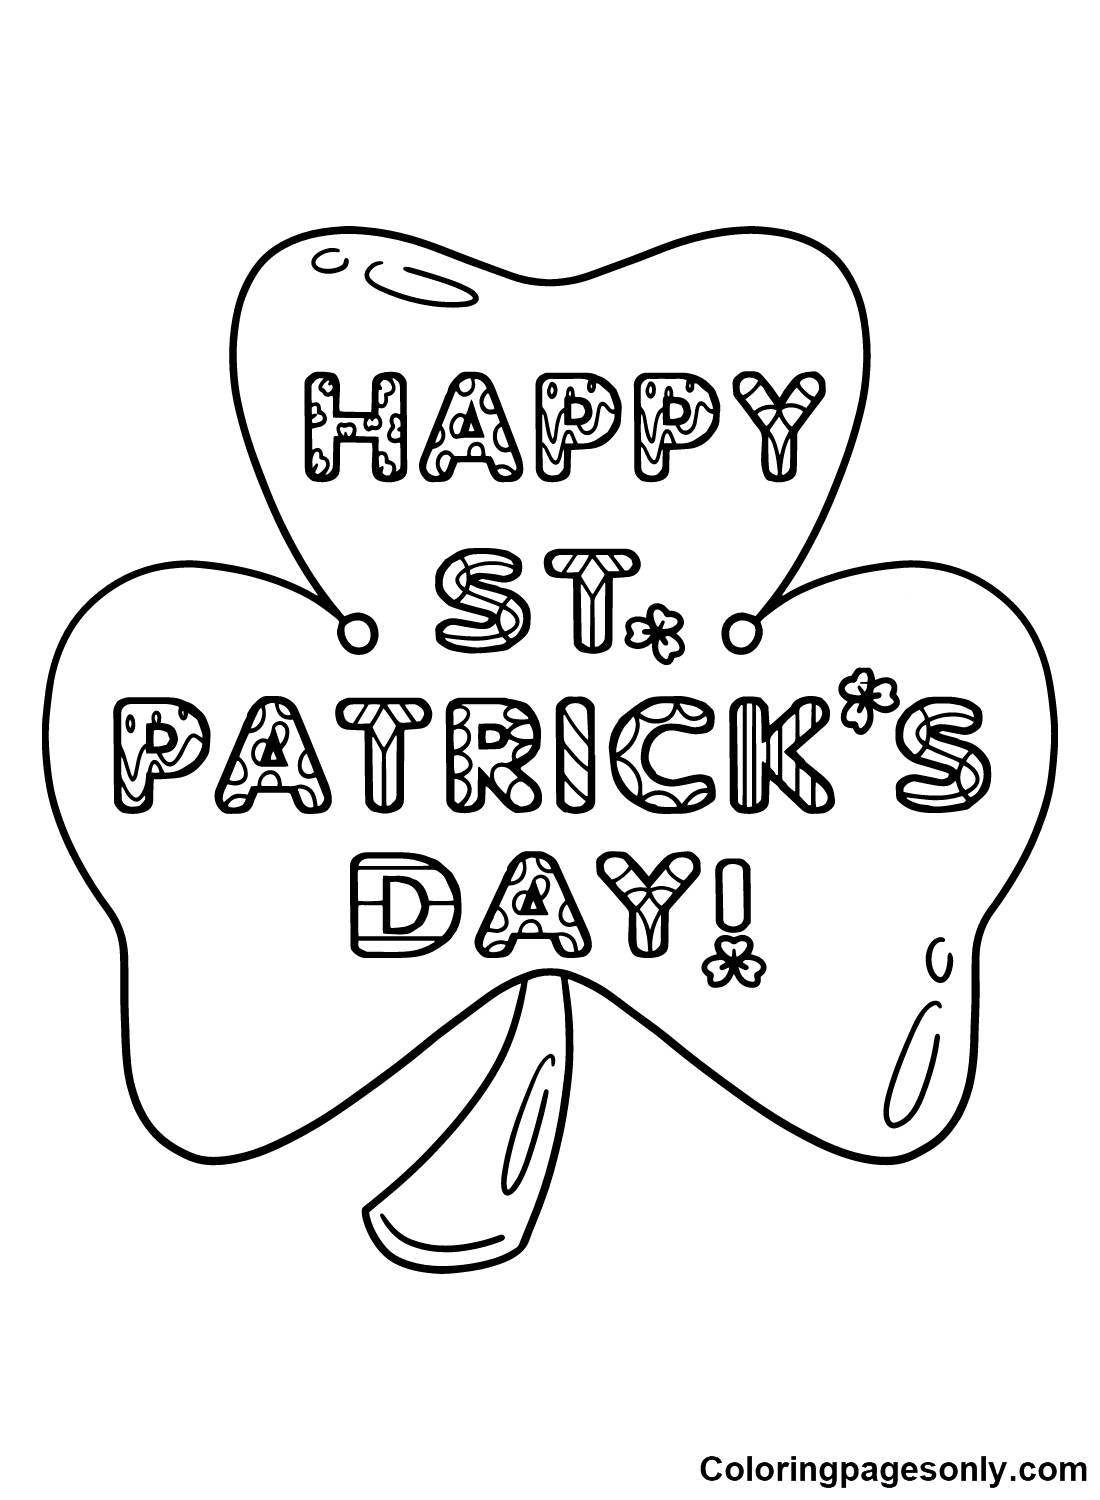 Shamrock in St Patricks Day Coloring Pages